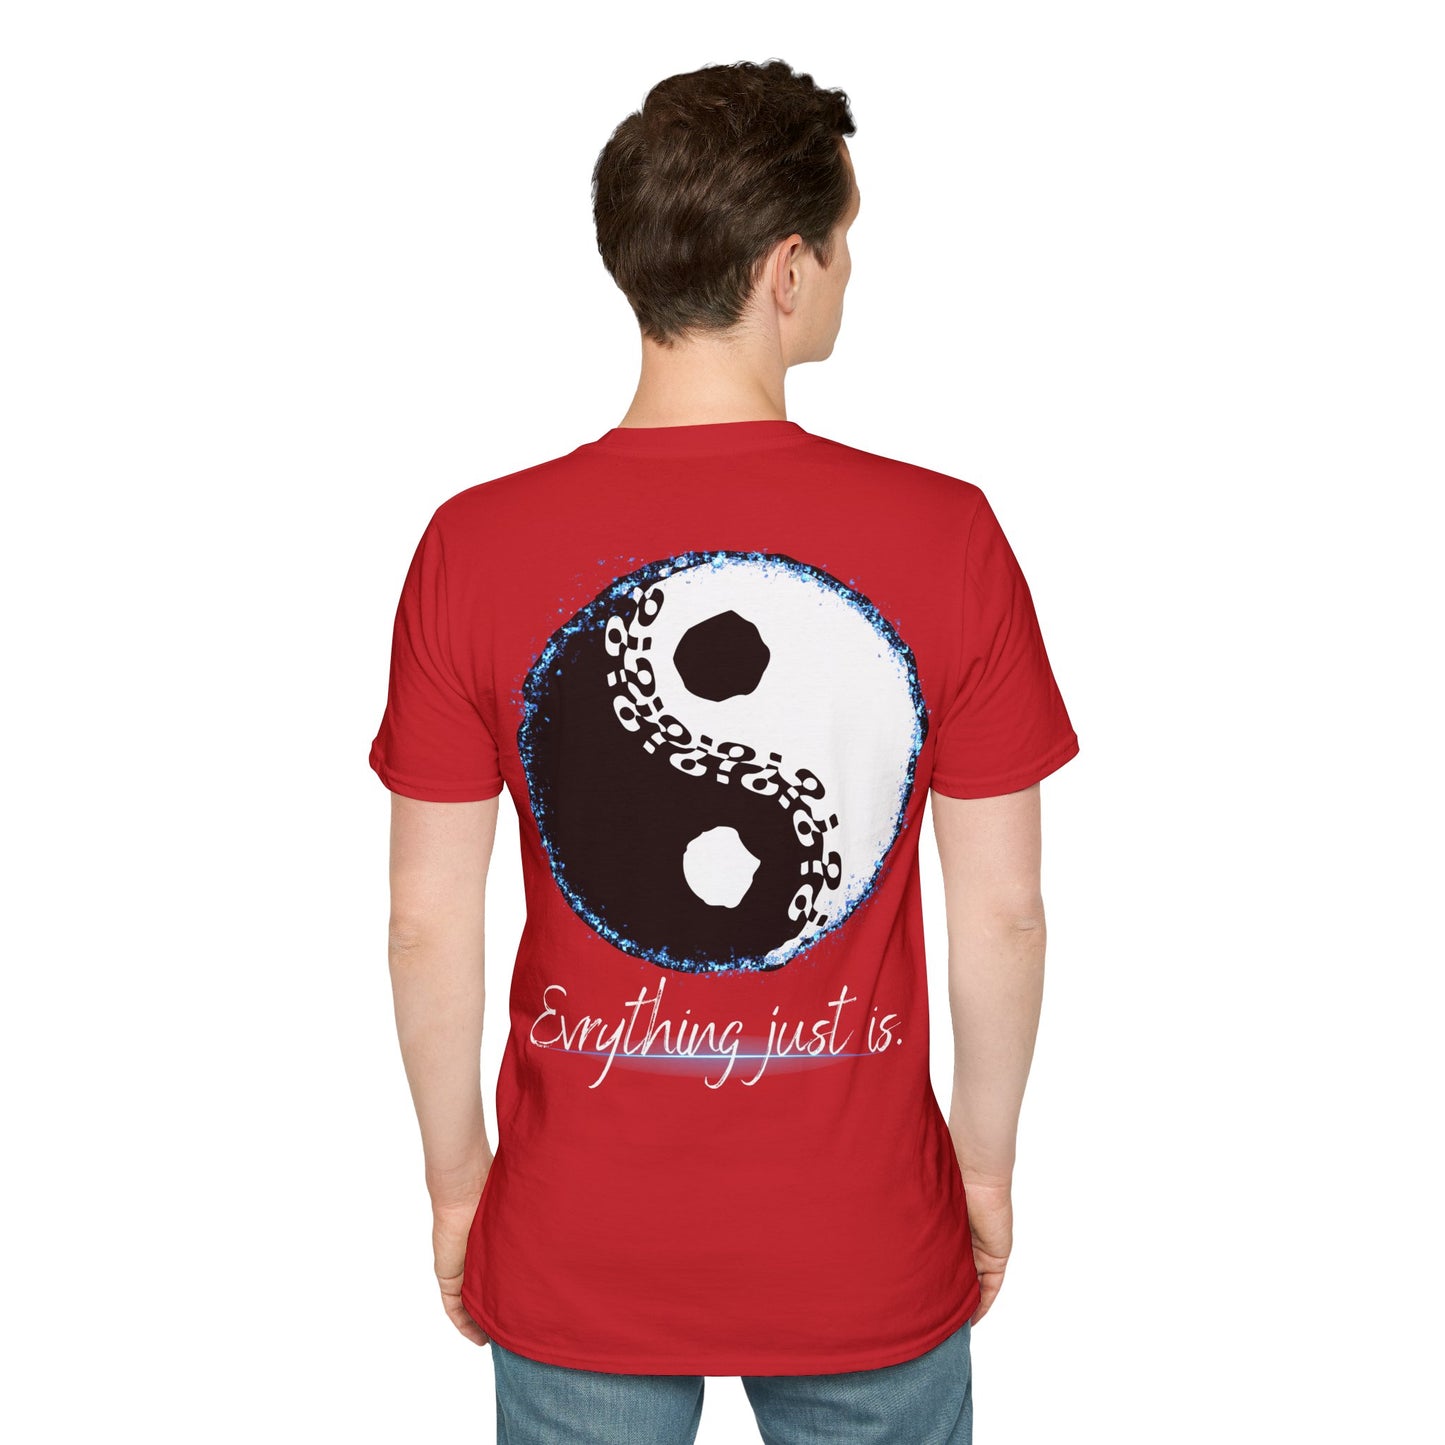 Yin Yang Eveything Just is Not Aggressive. POWERFUL™️ Unisex Softstyle T-Shirt